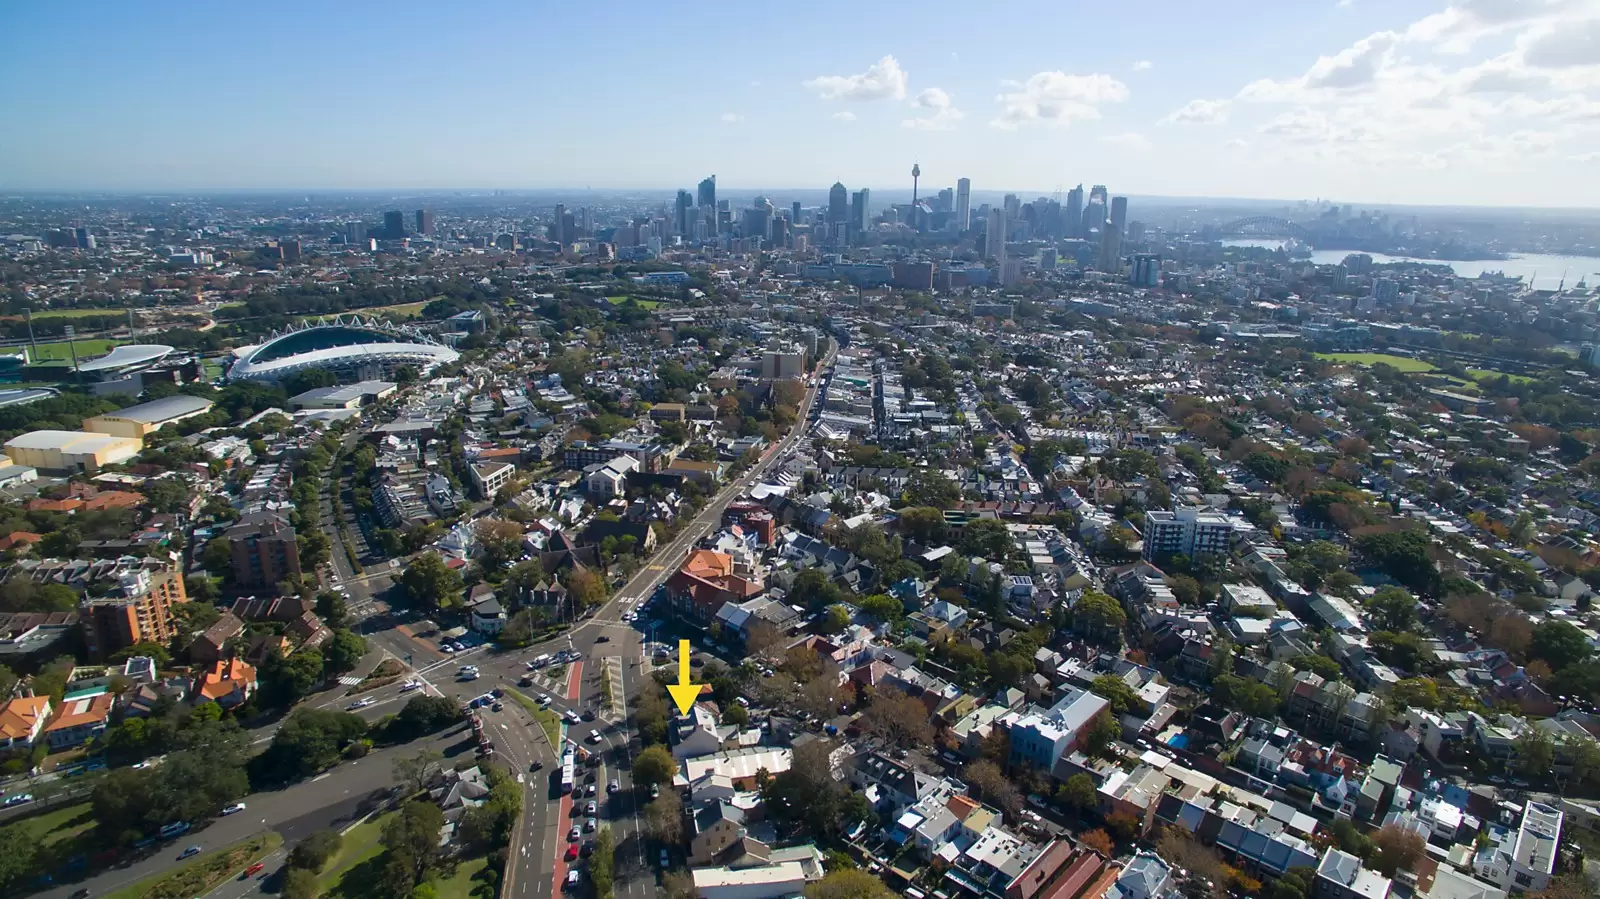 Photo #8: 42 Oxford Street, Woollahra - Sold by Sydney Sotheby's International Realty